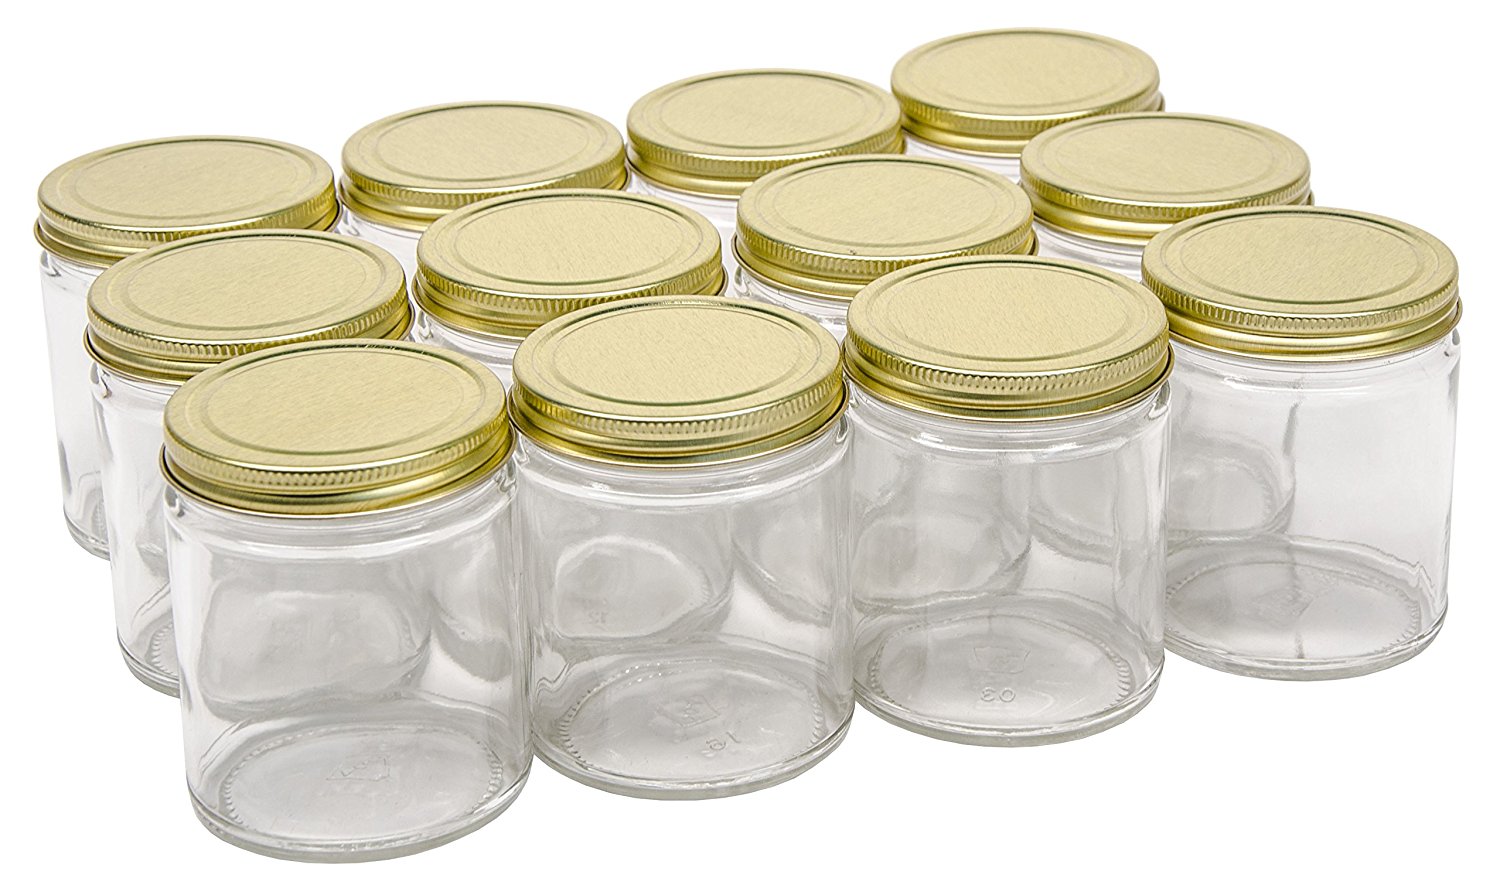 NMS 16 Ounce Glass Regular Mouth Mason Canning Jars - Case of 12 - With  Black Lids > North Mountain Supply